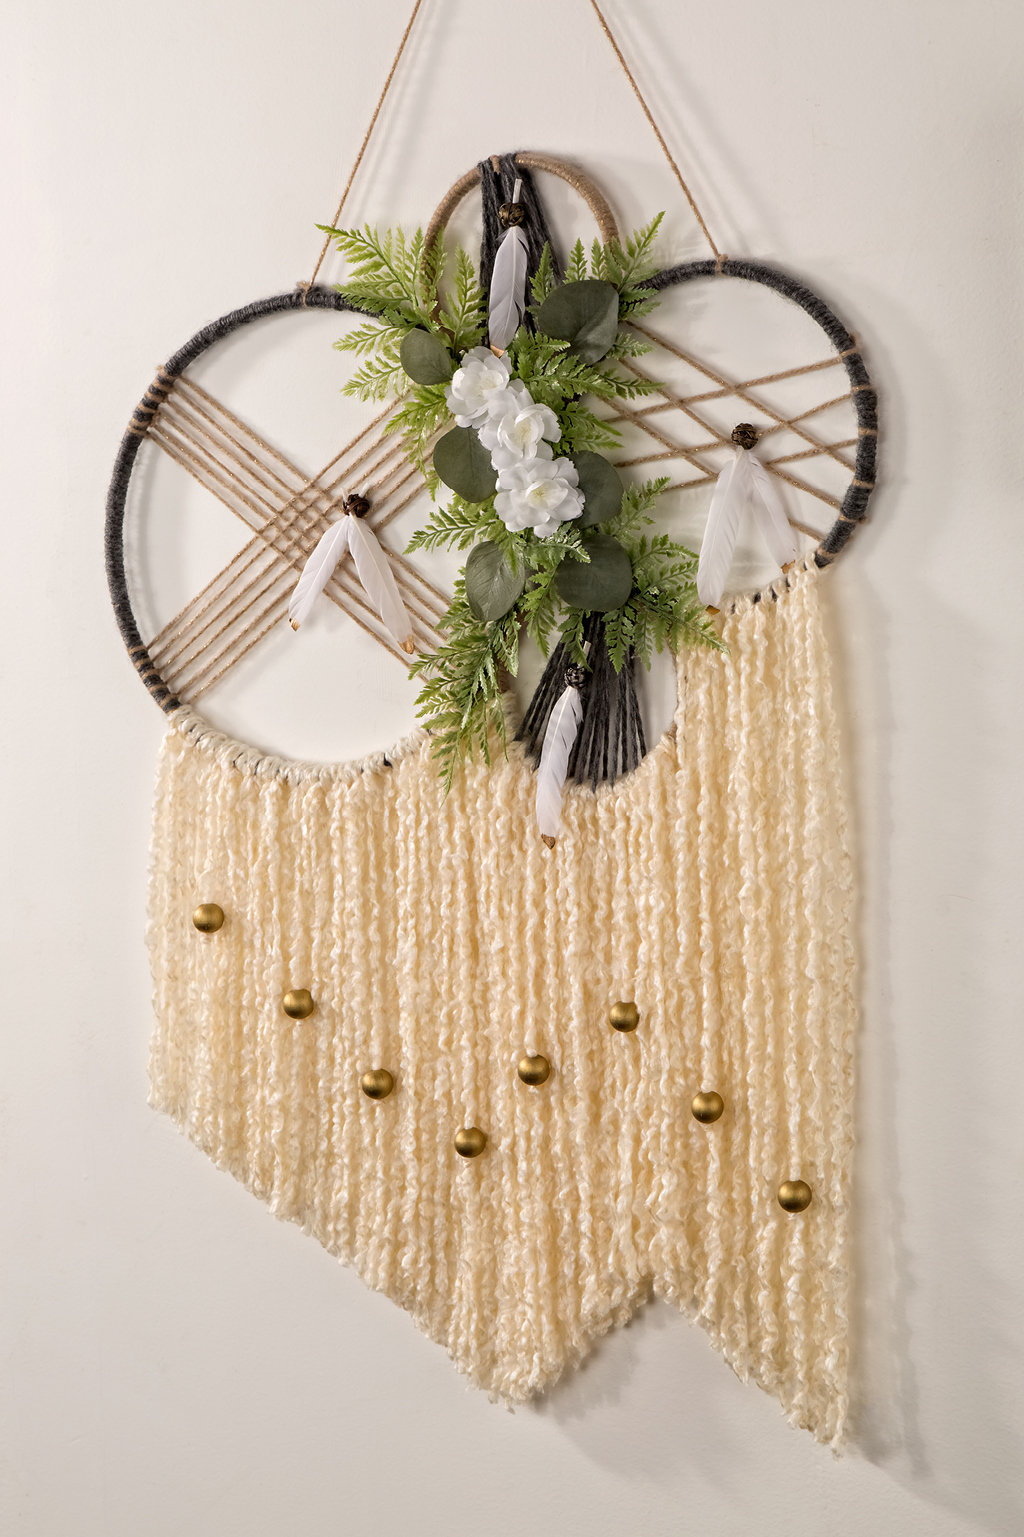 Dreamcatcher with white strings and flowers